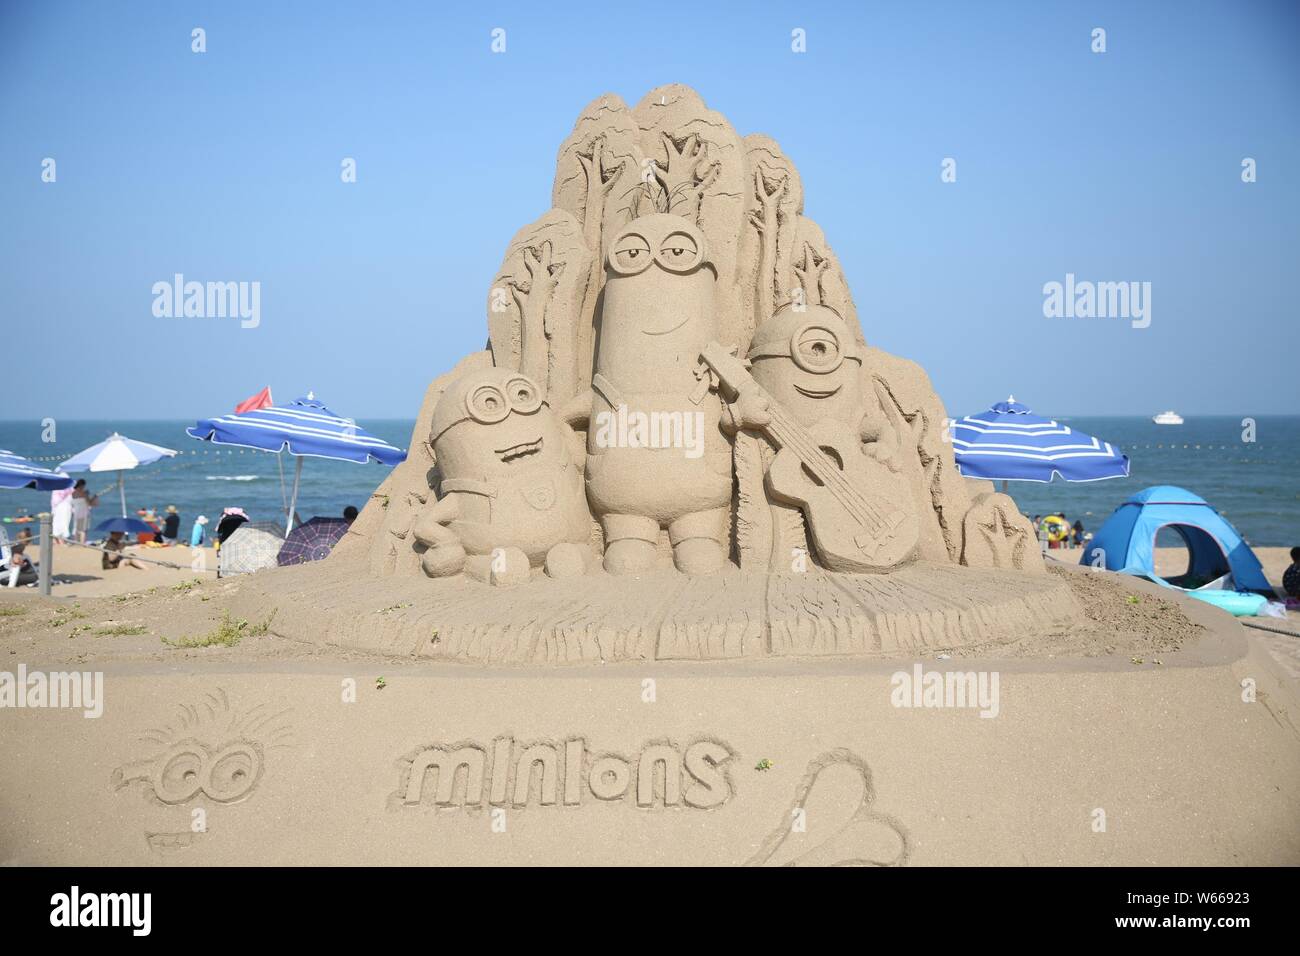 A sand sculpture of characters from the American animated film 